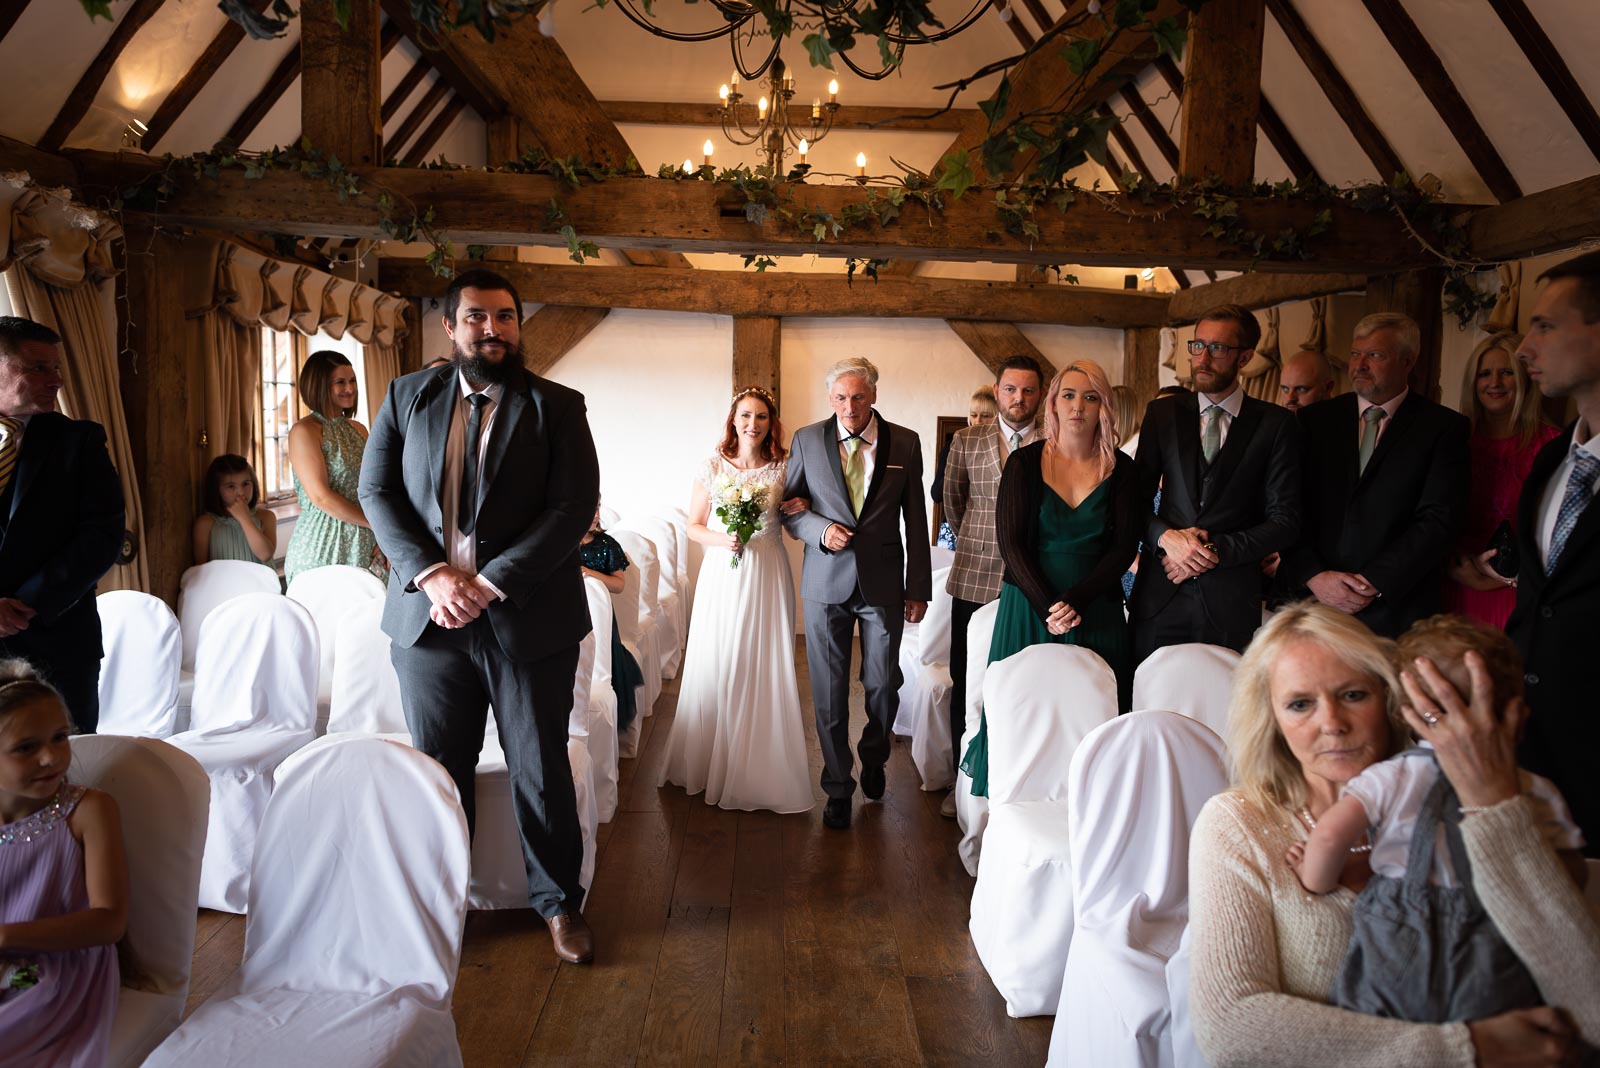 Adrienn walks down the aisle linking arms with her dad at Milwards Farm Estate near Lewes before getting married to Lee. 